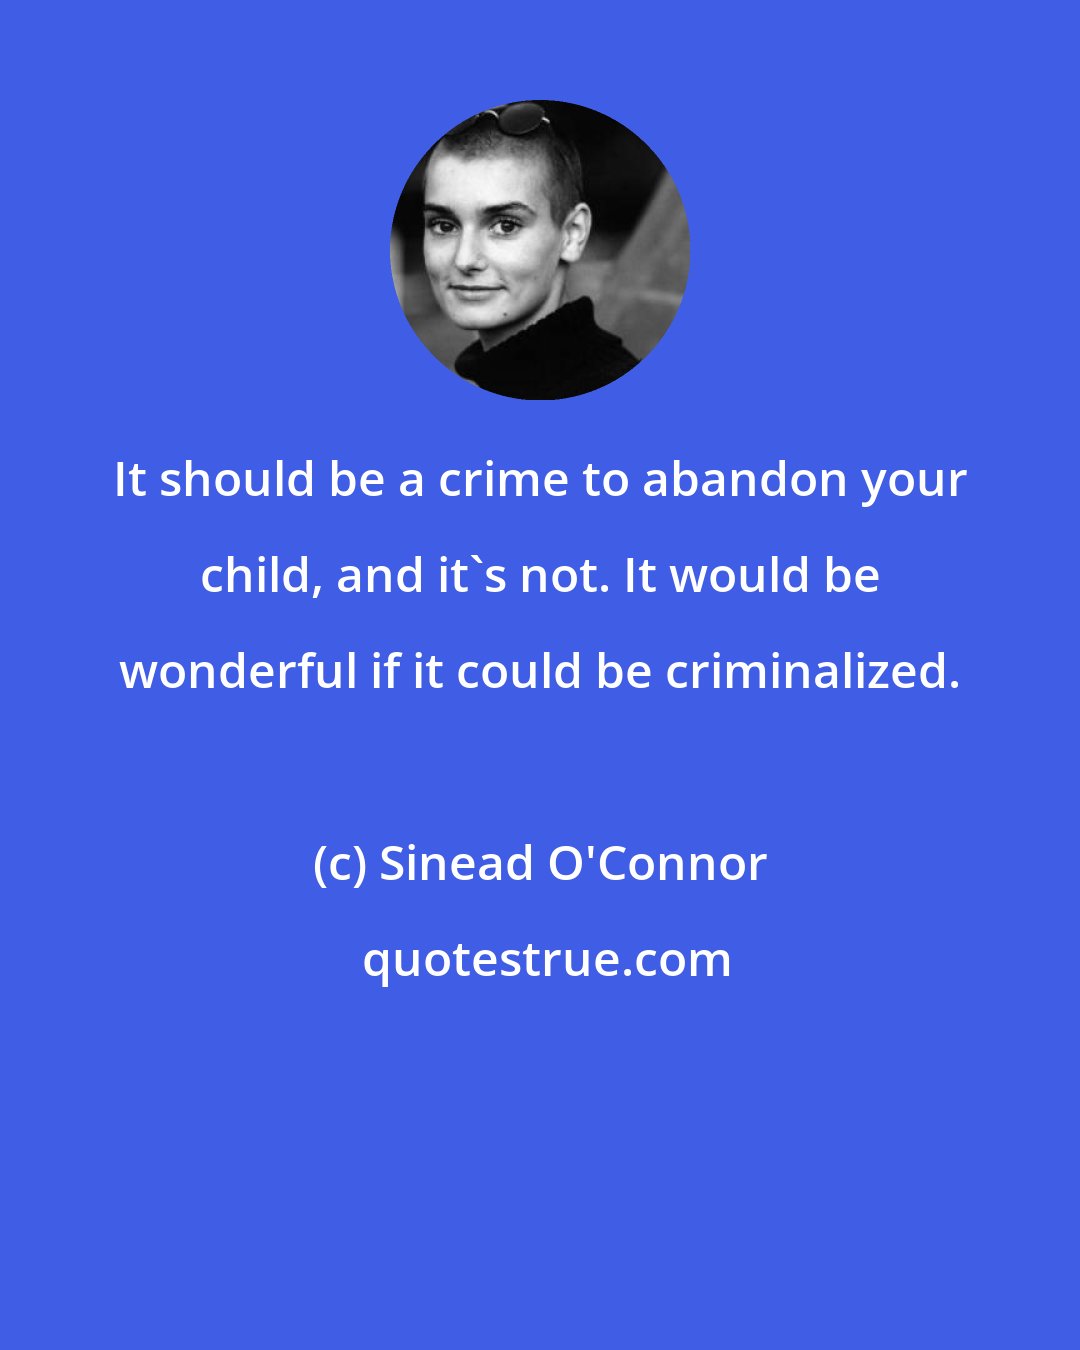 Sinead O'Connor: It should be a crime to abandon your child, and it's not. It would be wonderful if it could be criminalized.